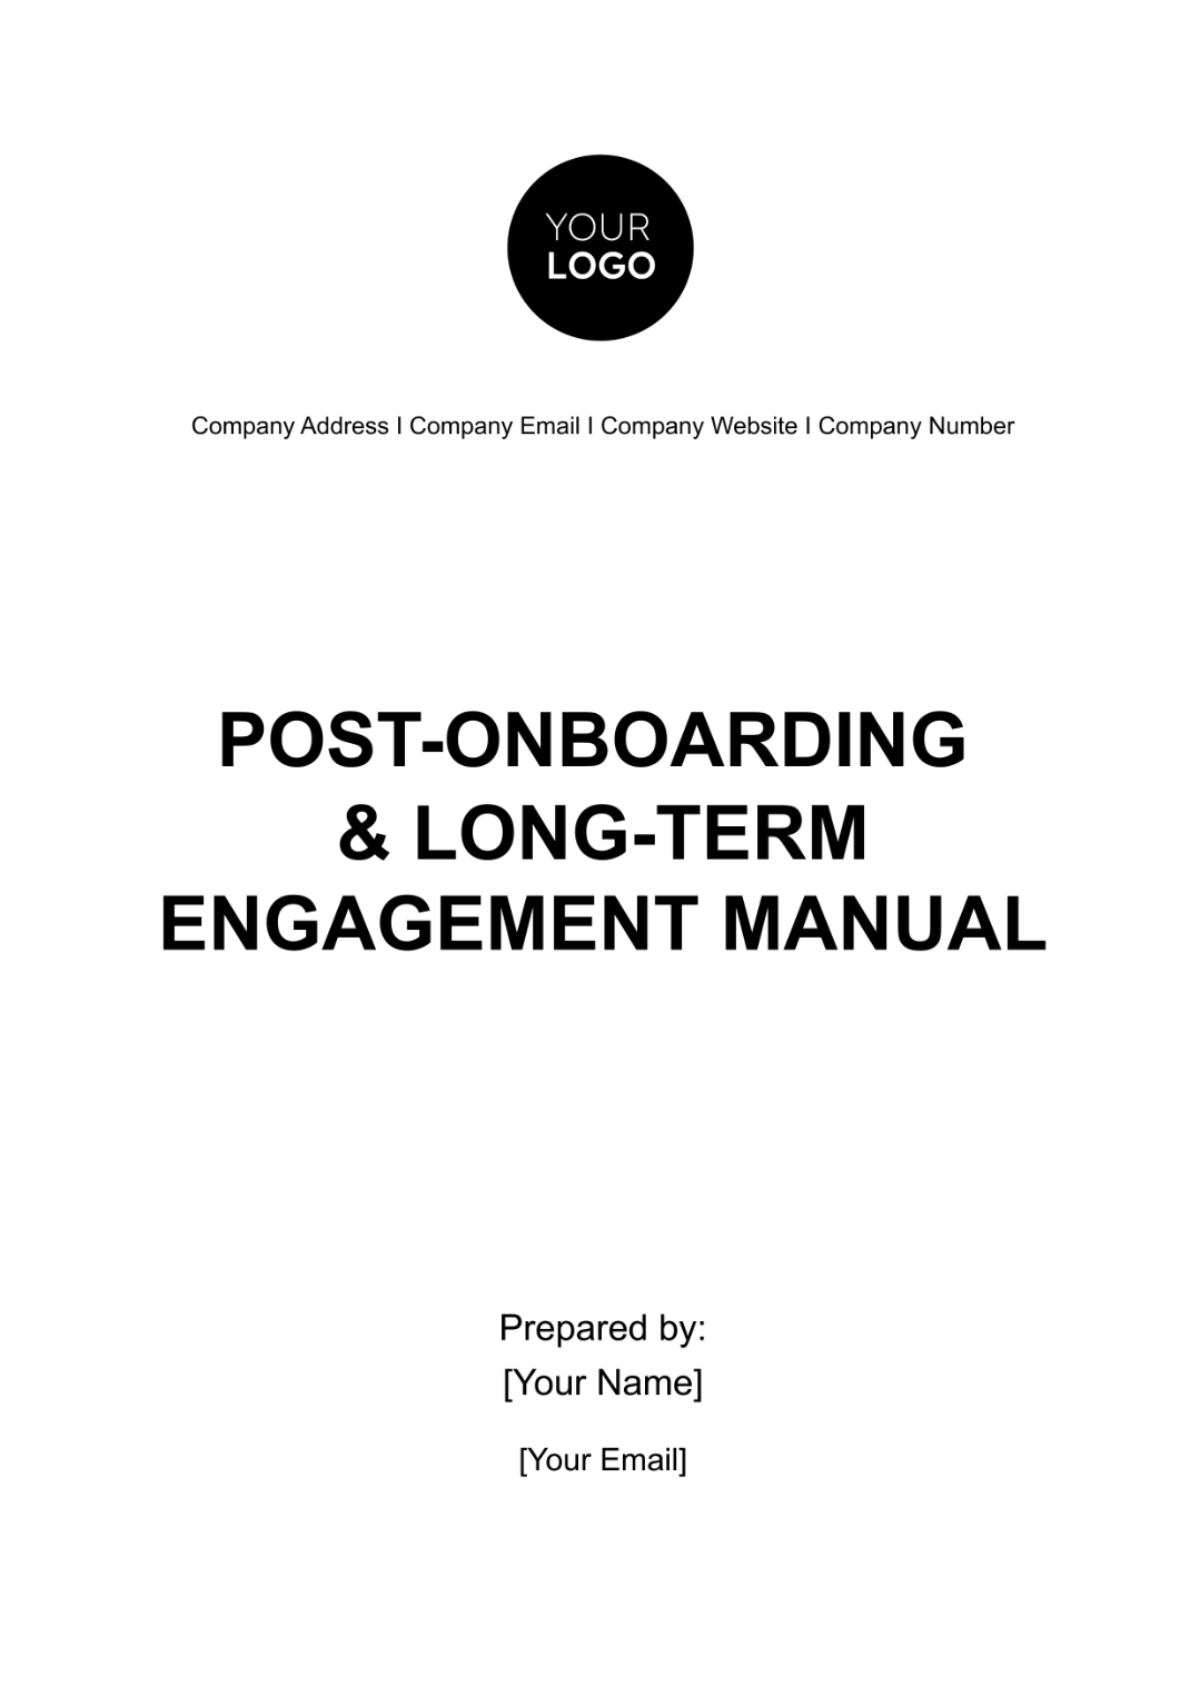 Free Post-Onboarding & Long-Term Engagement Manual HR Template